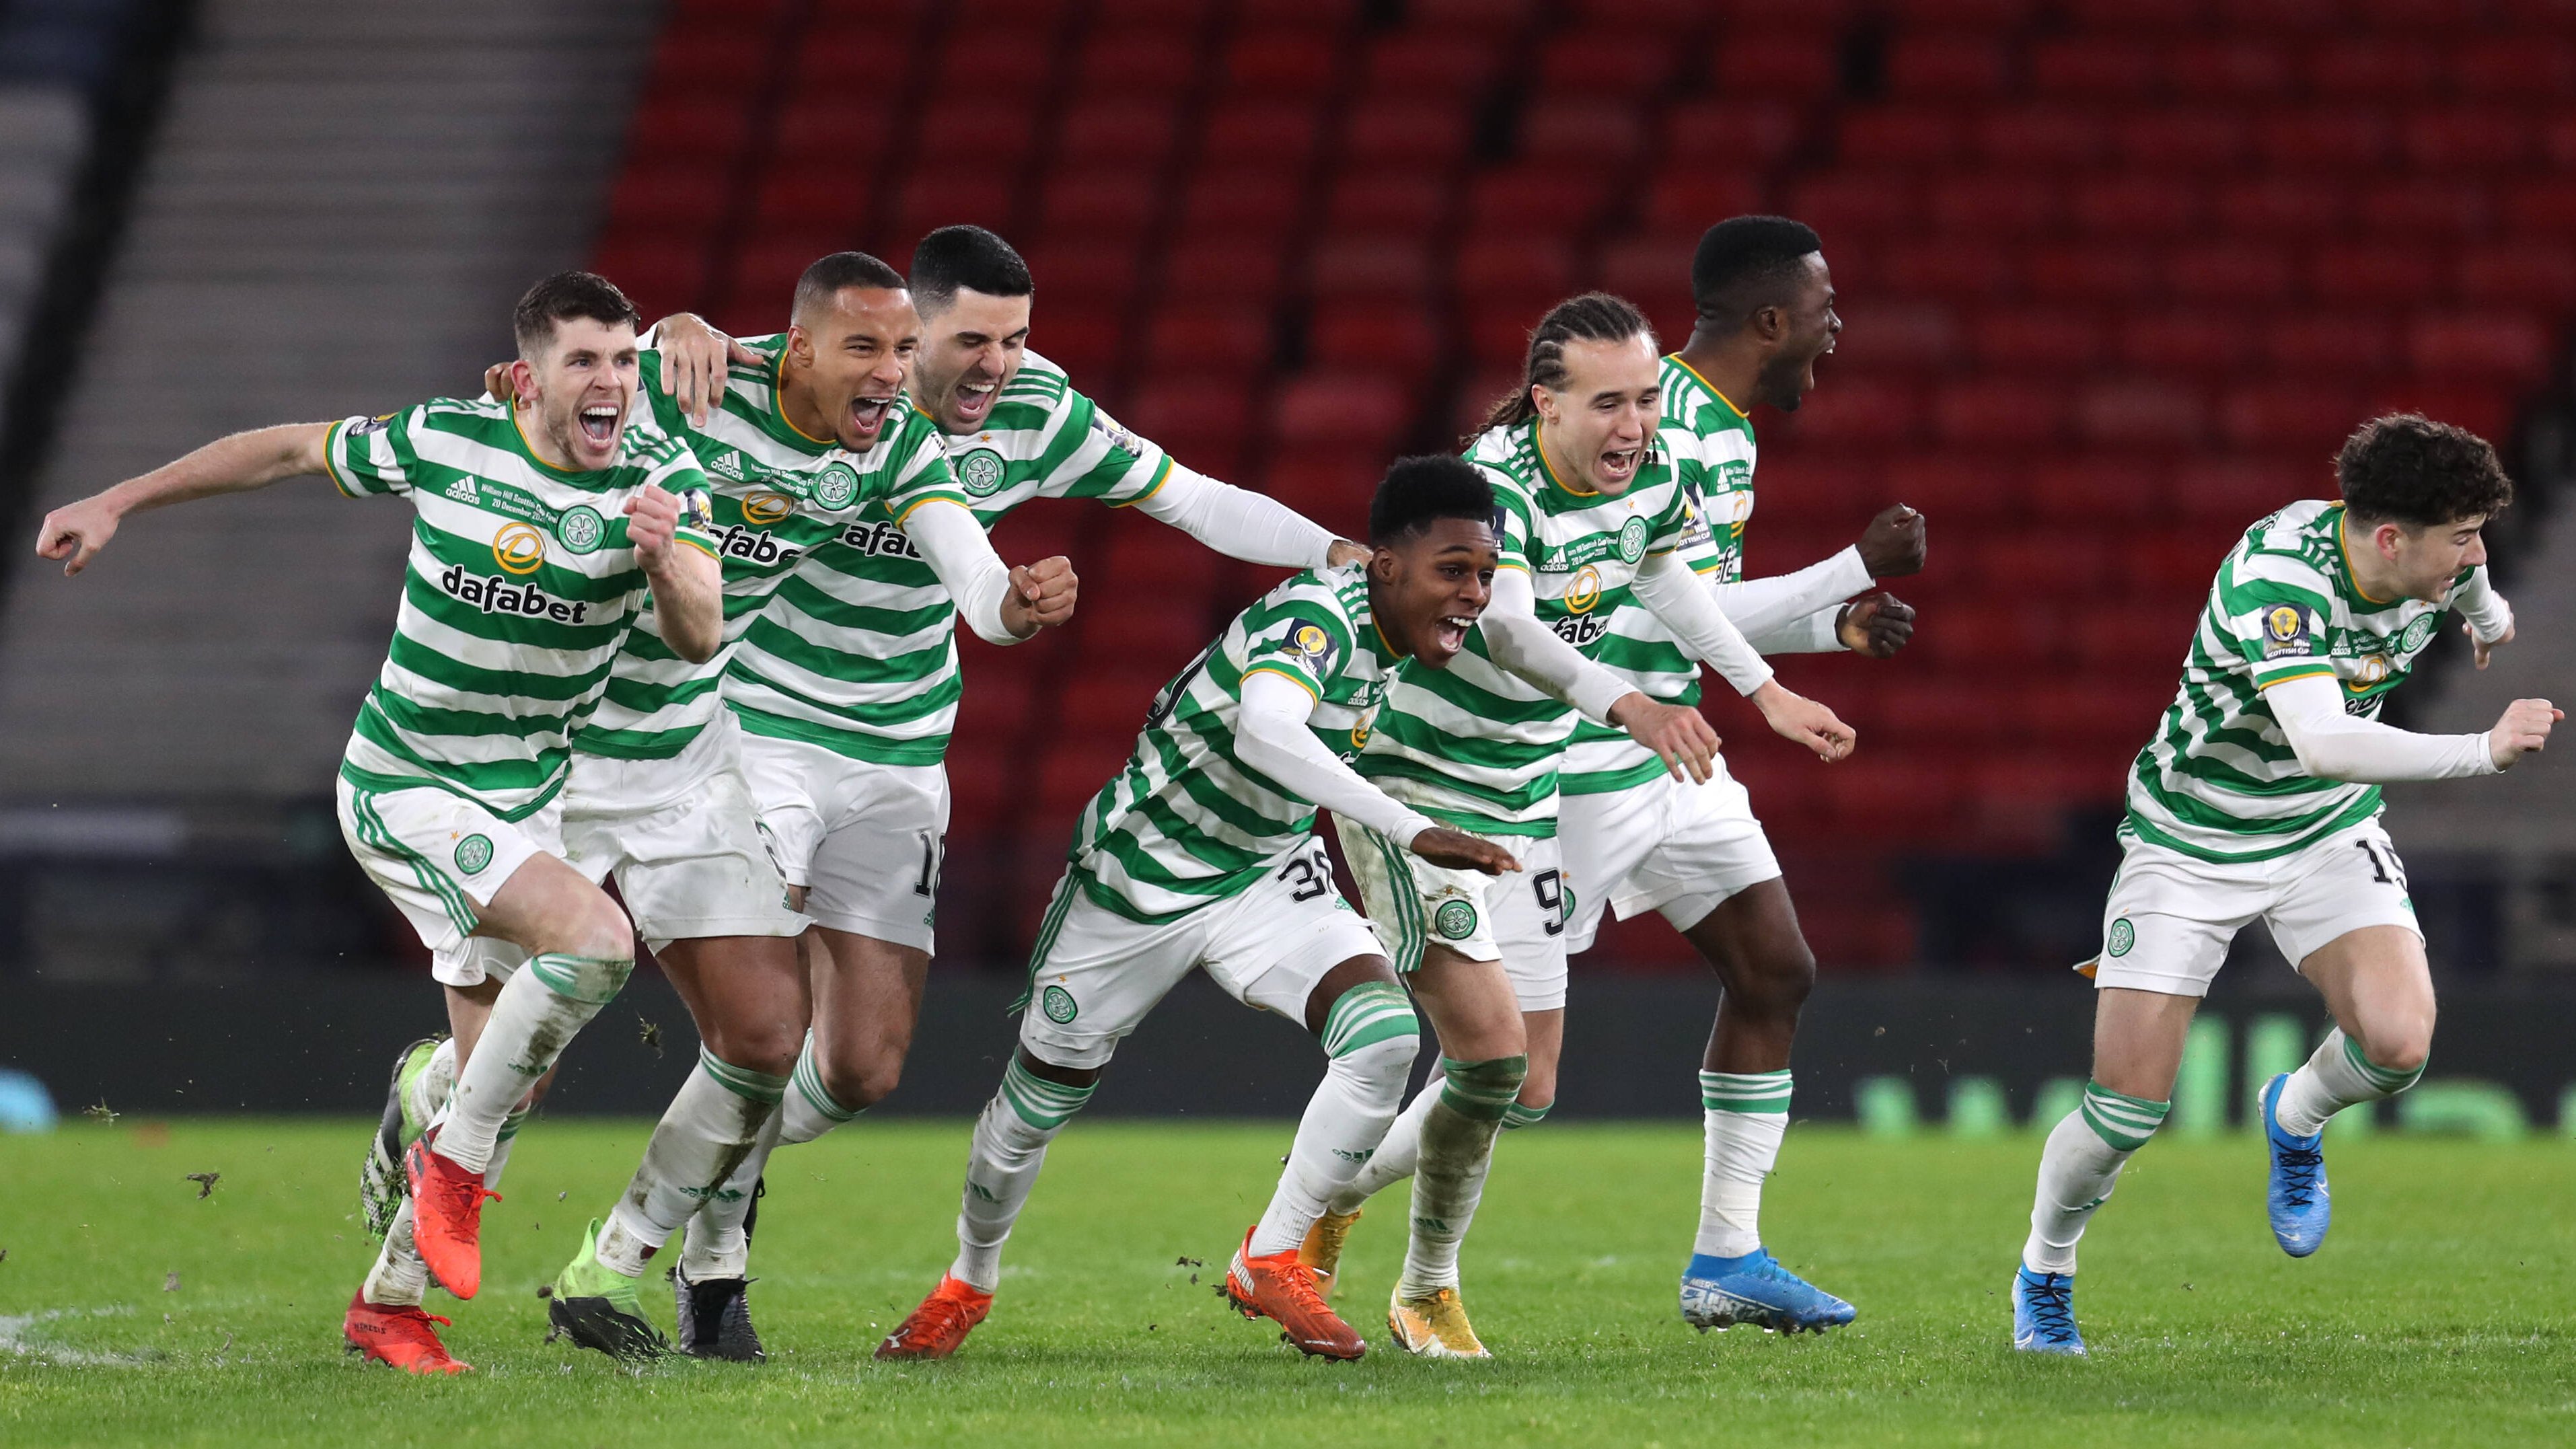 Celtic seal historic Treble with Scottish Cup final victory over